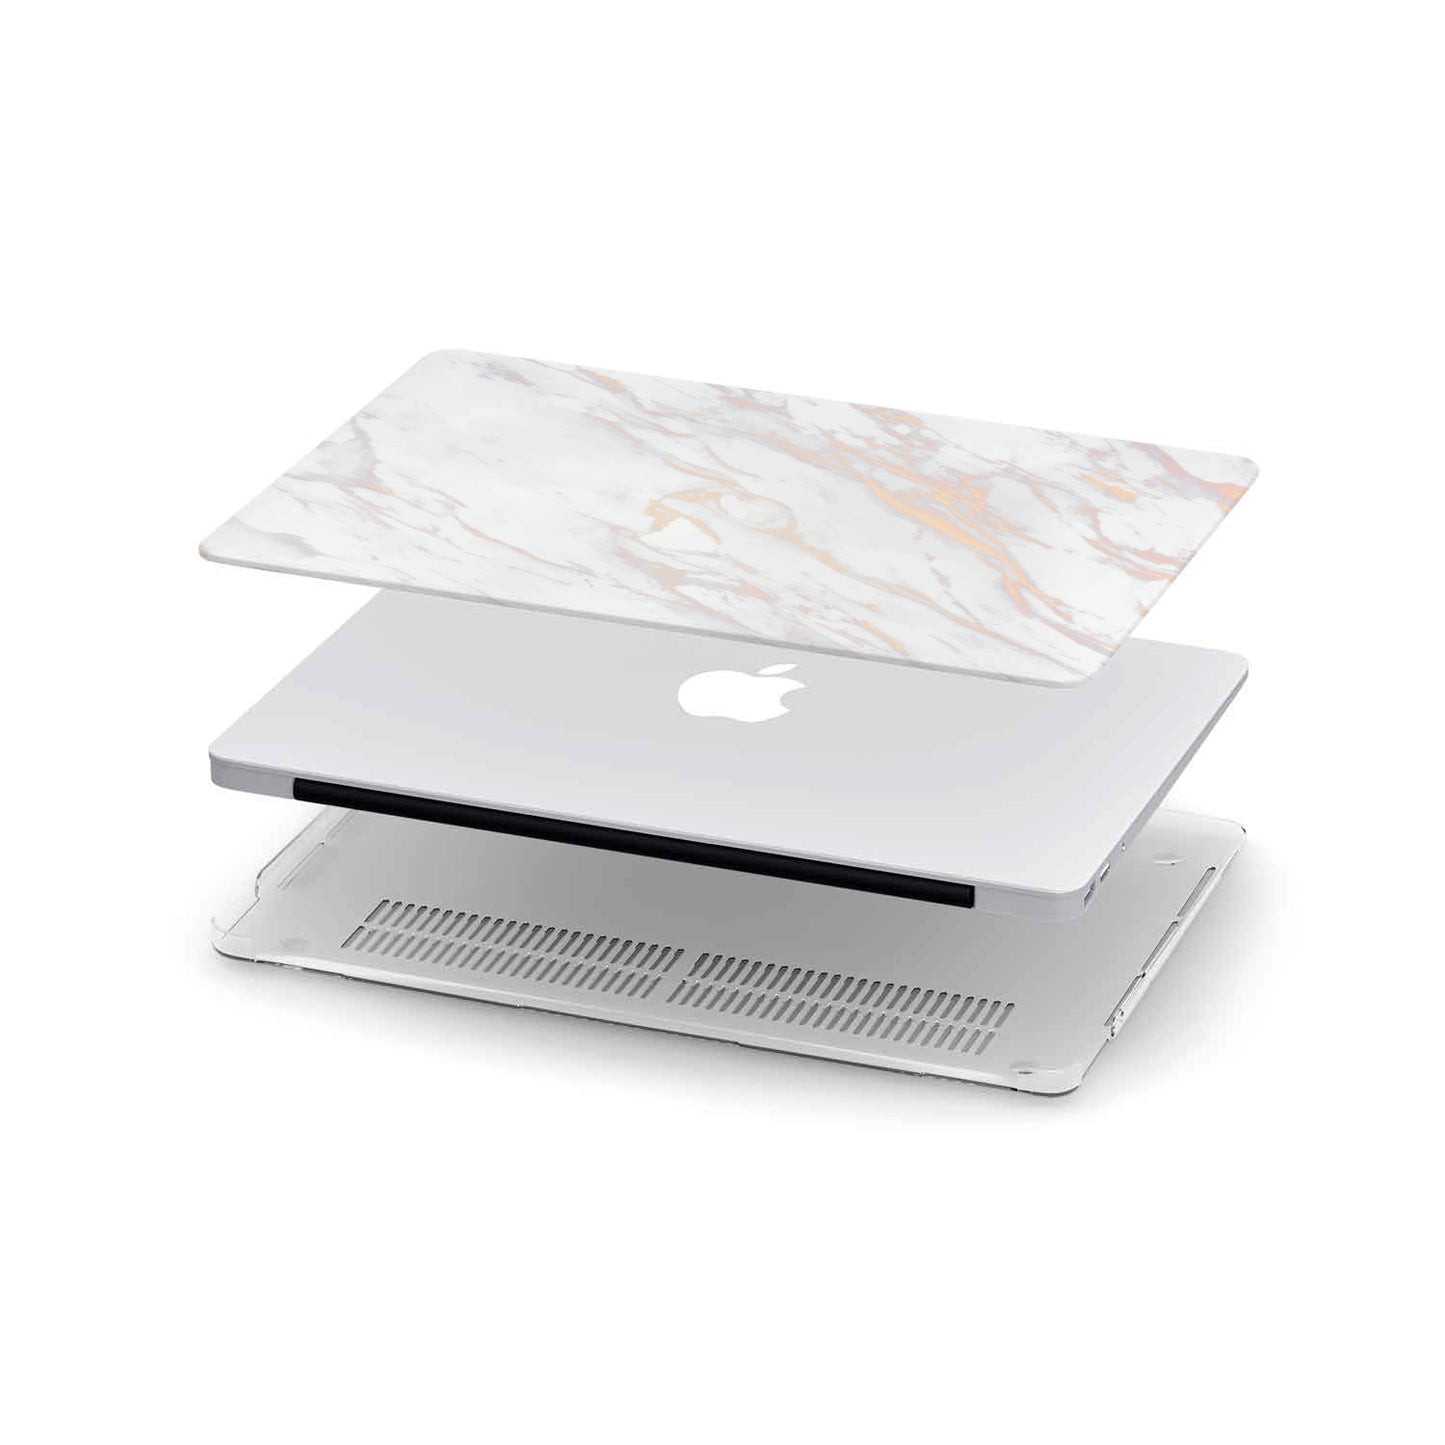 Personalized Macbook Hard Shell Case - White Gold Pink Marble